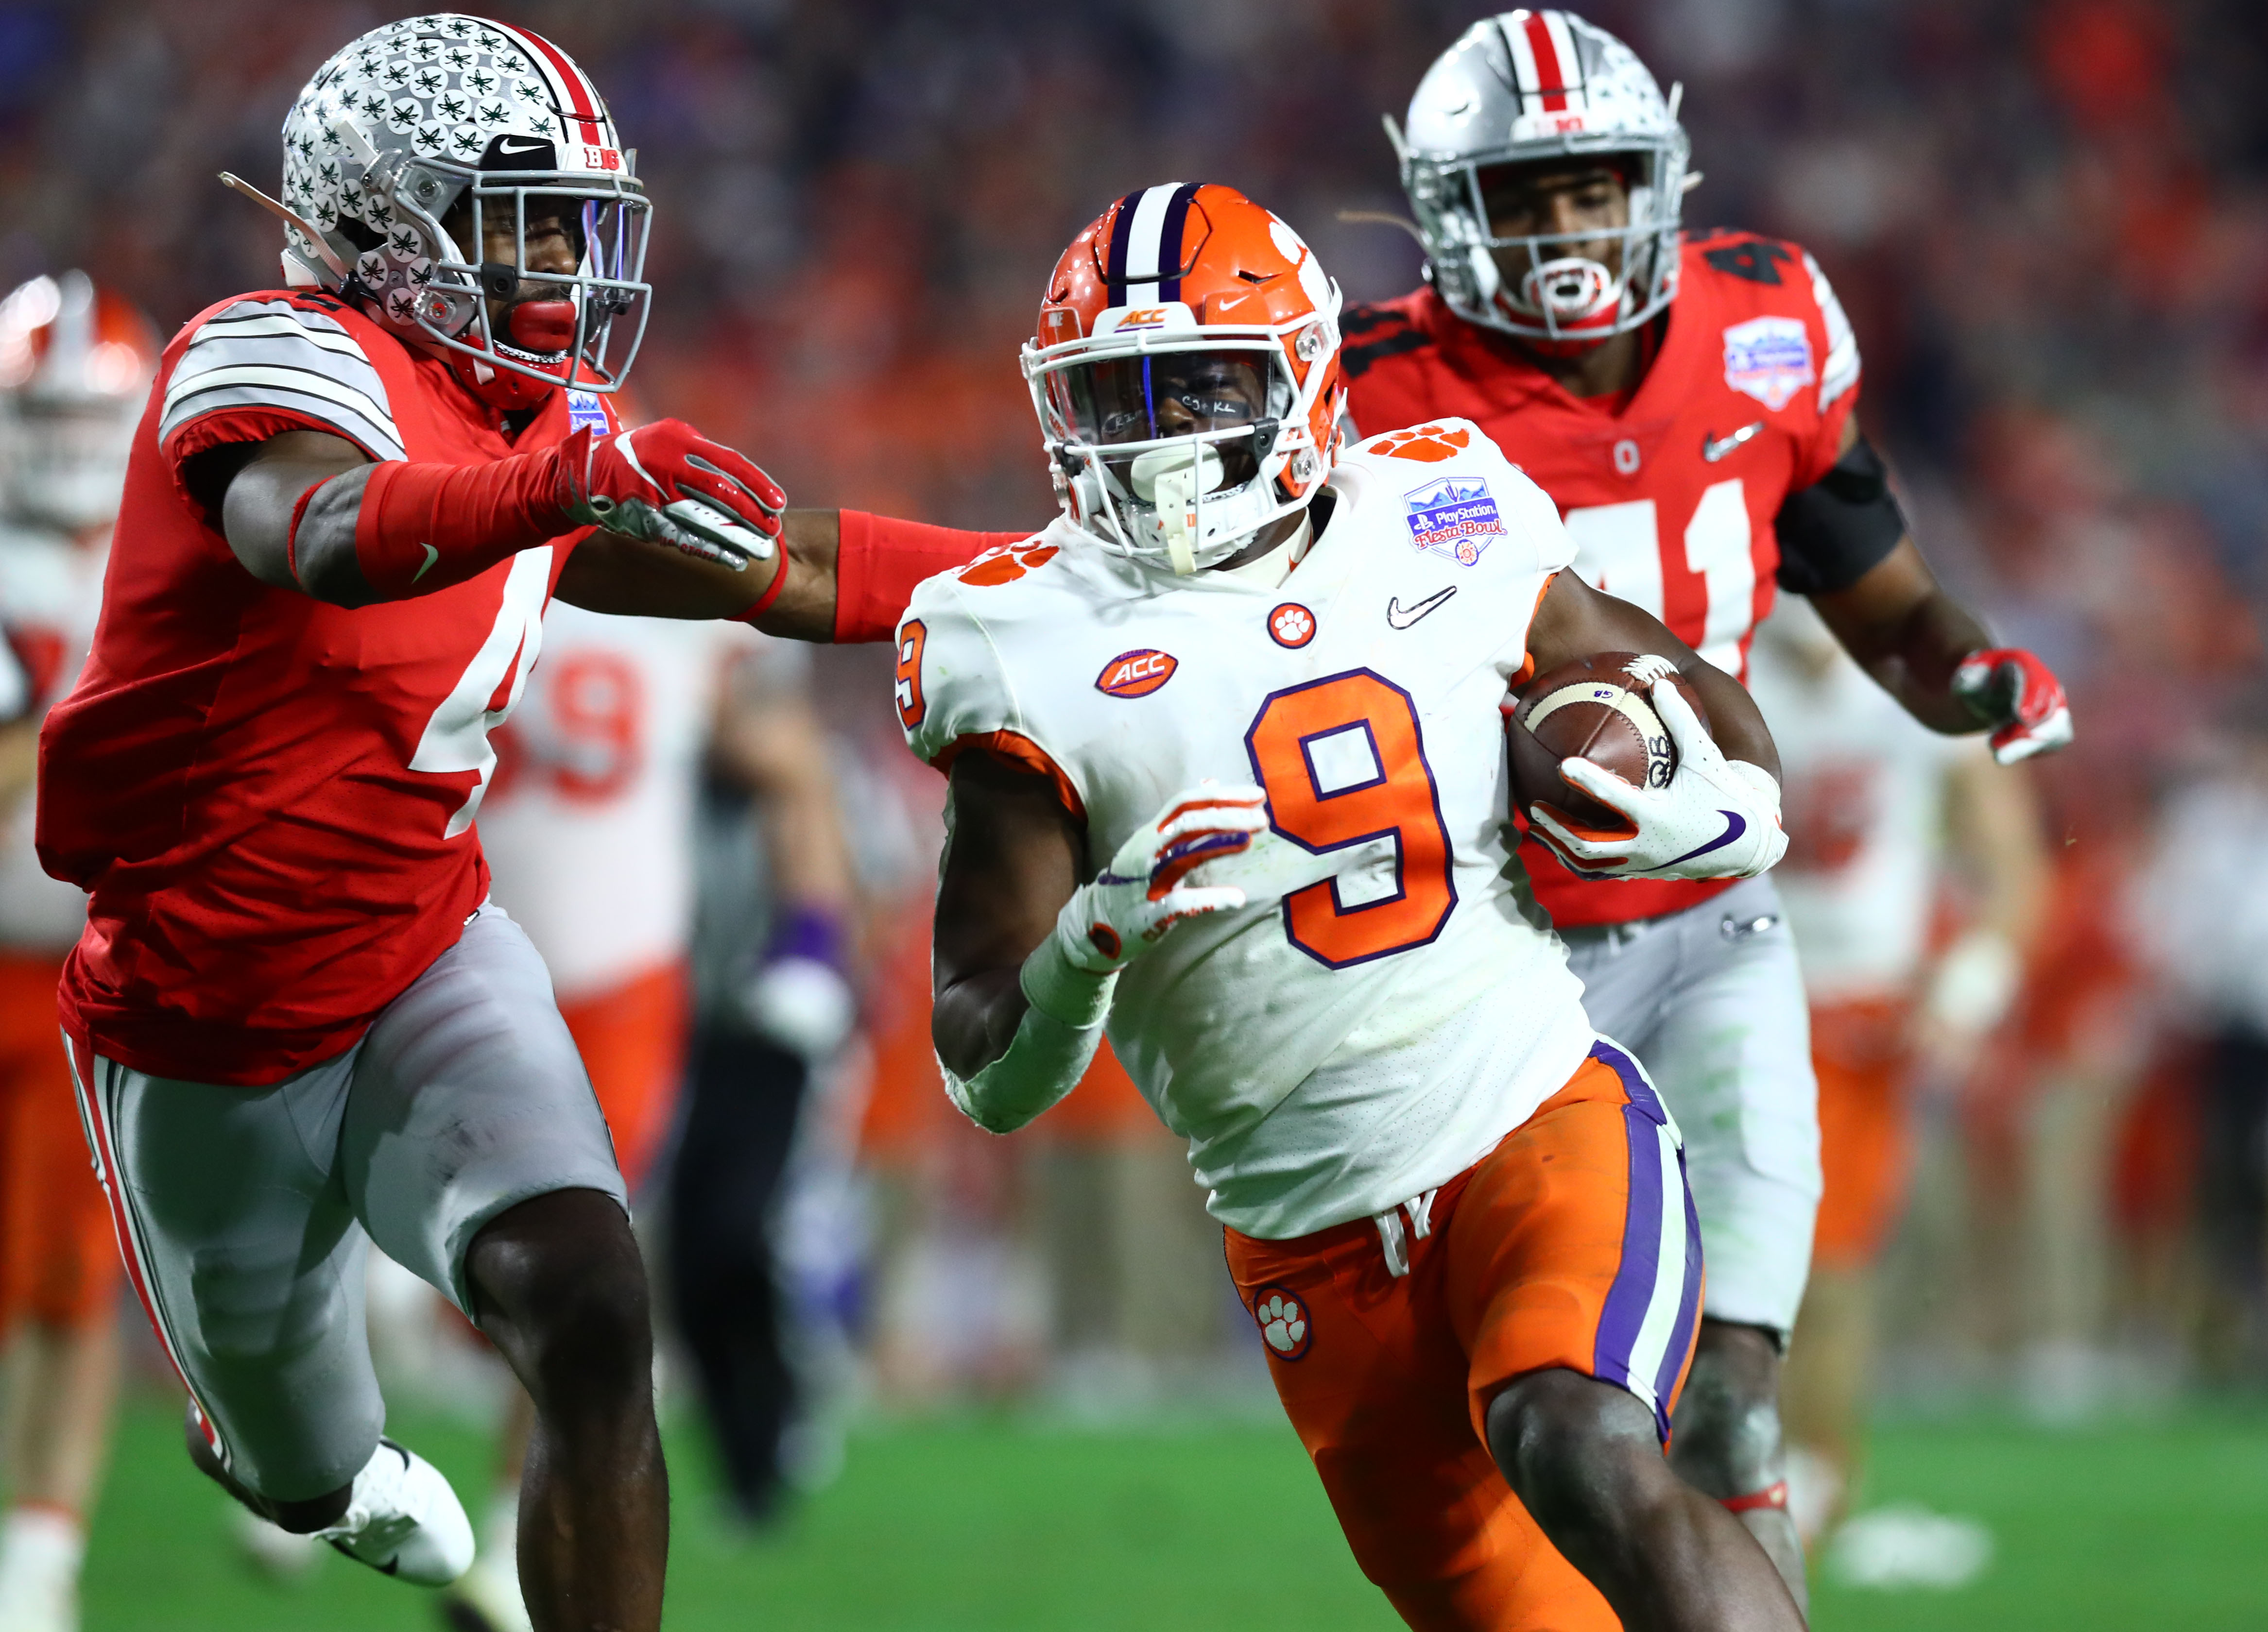 LSUClemson players NFL teams should have their eye on